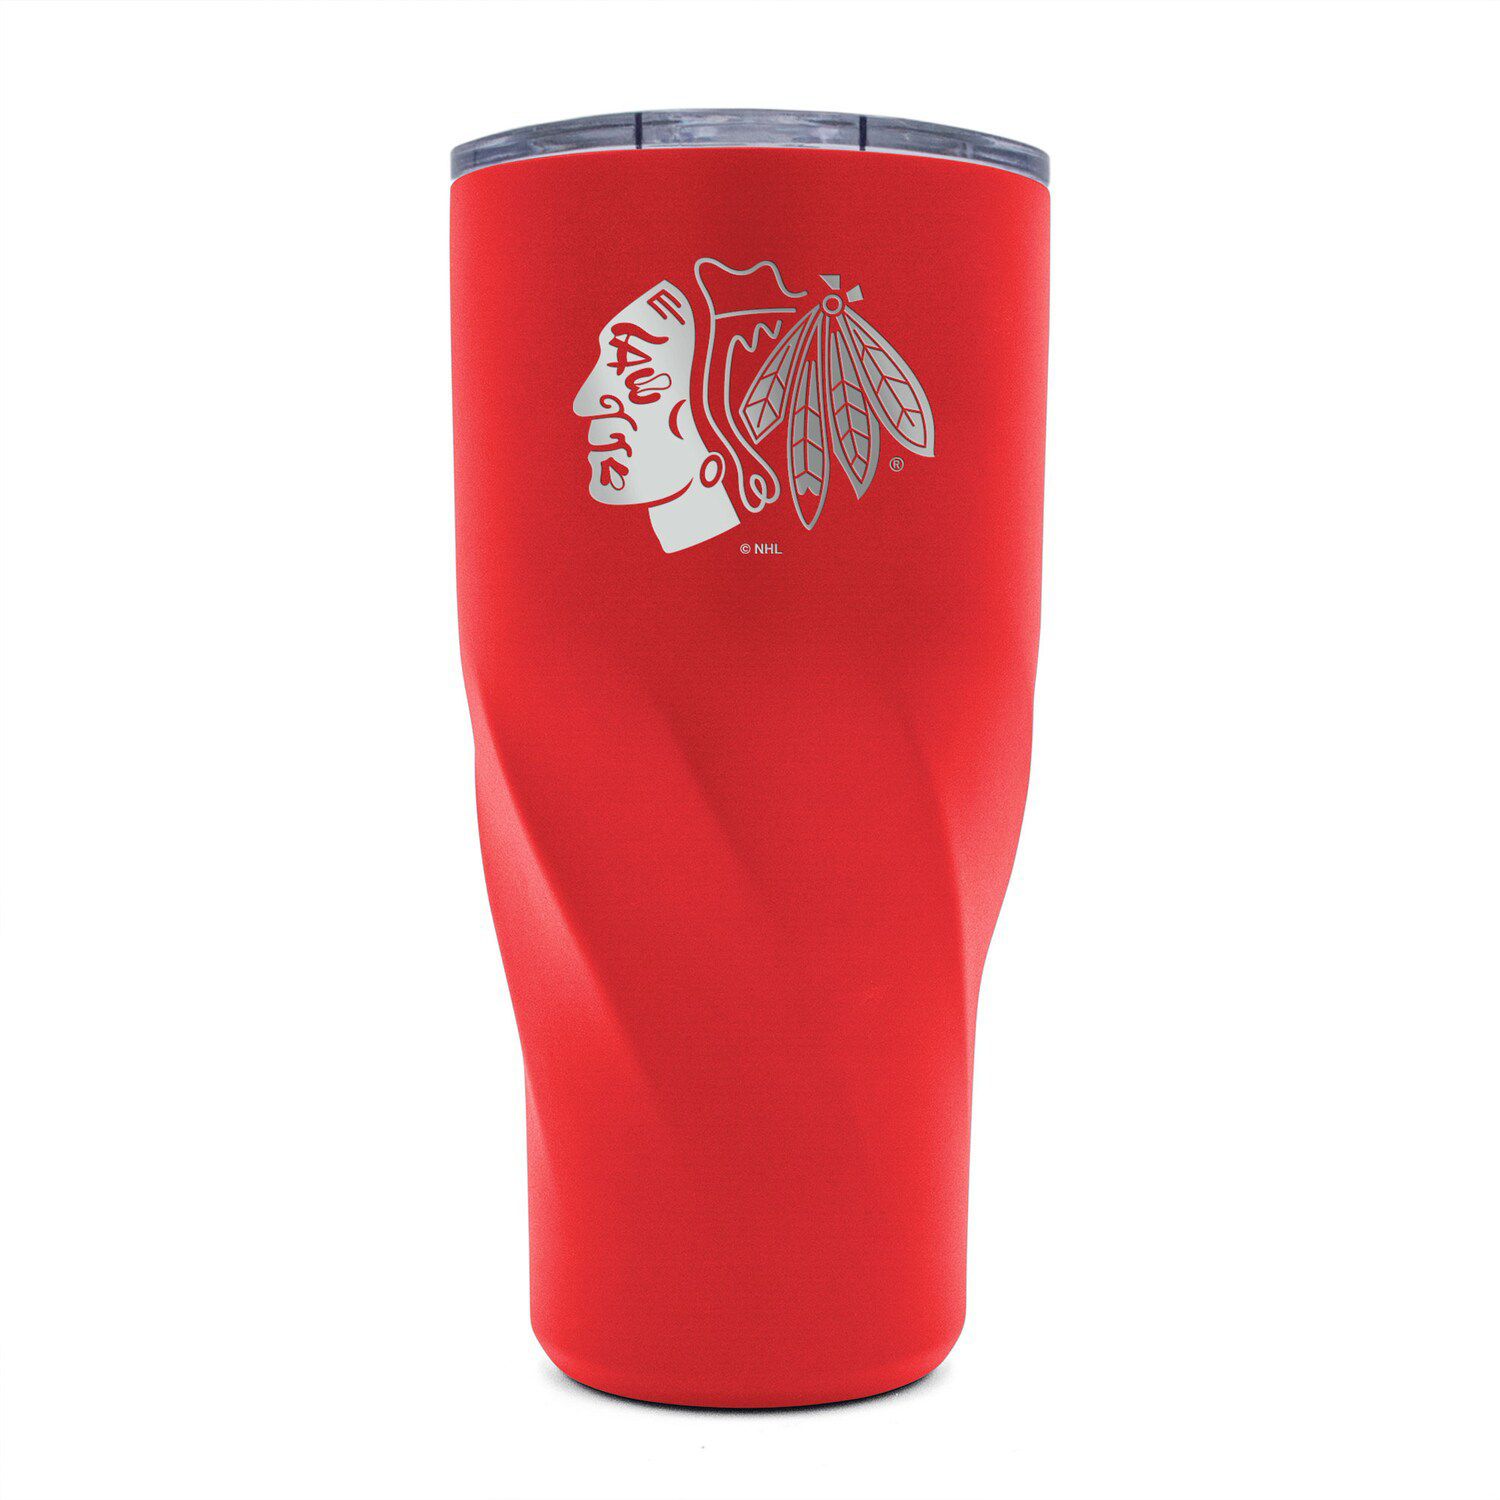 Stanley Cup Gifts & Merchandise for Sale